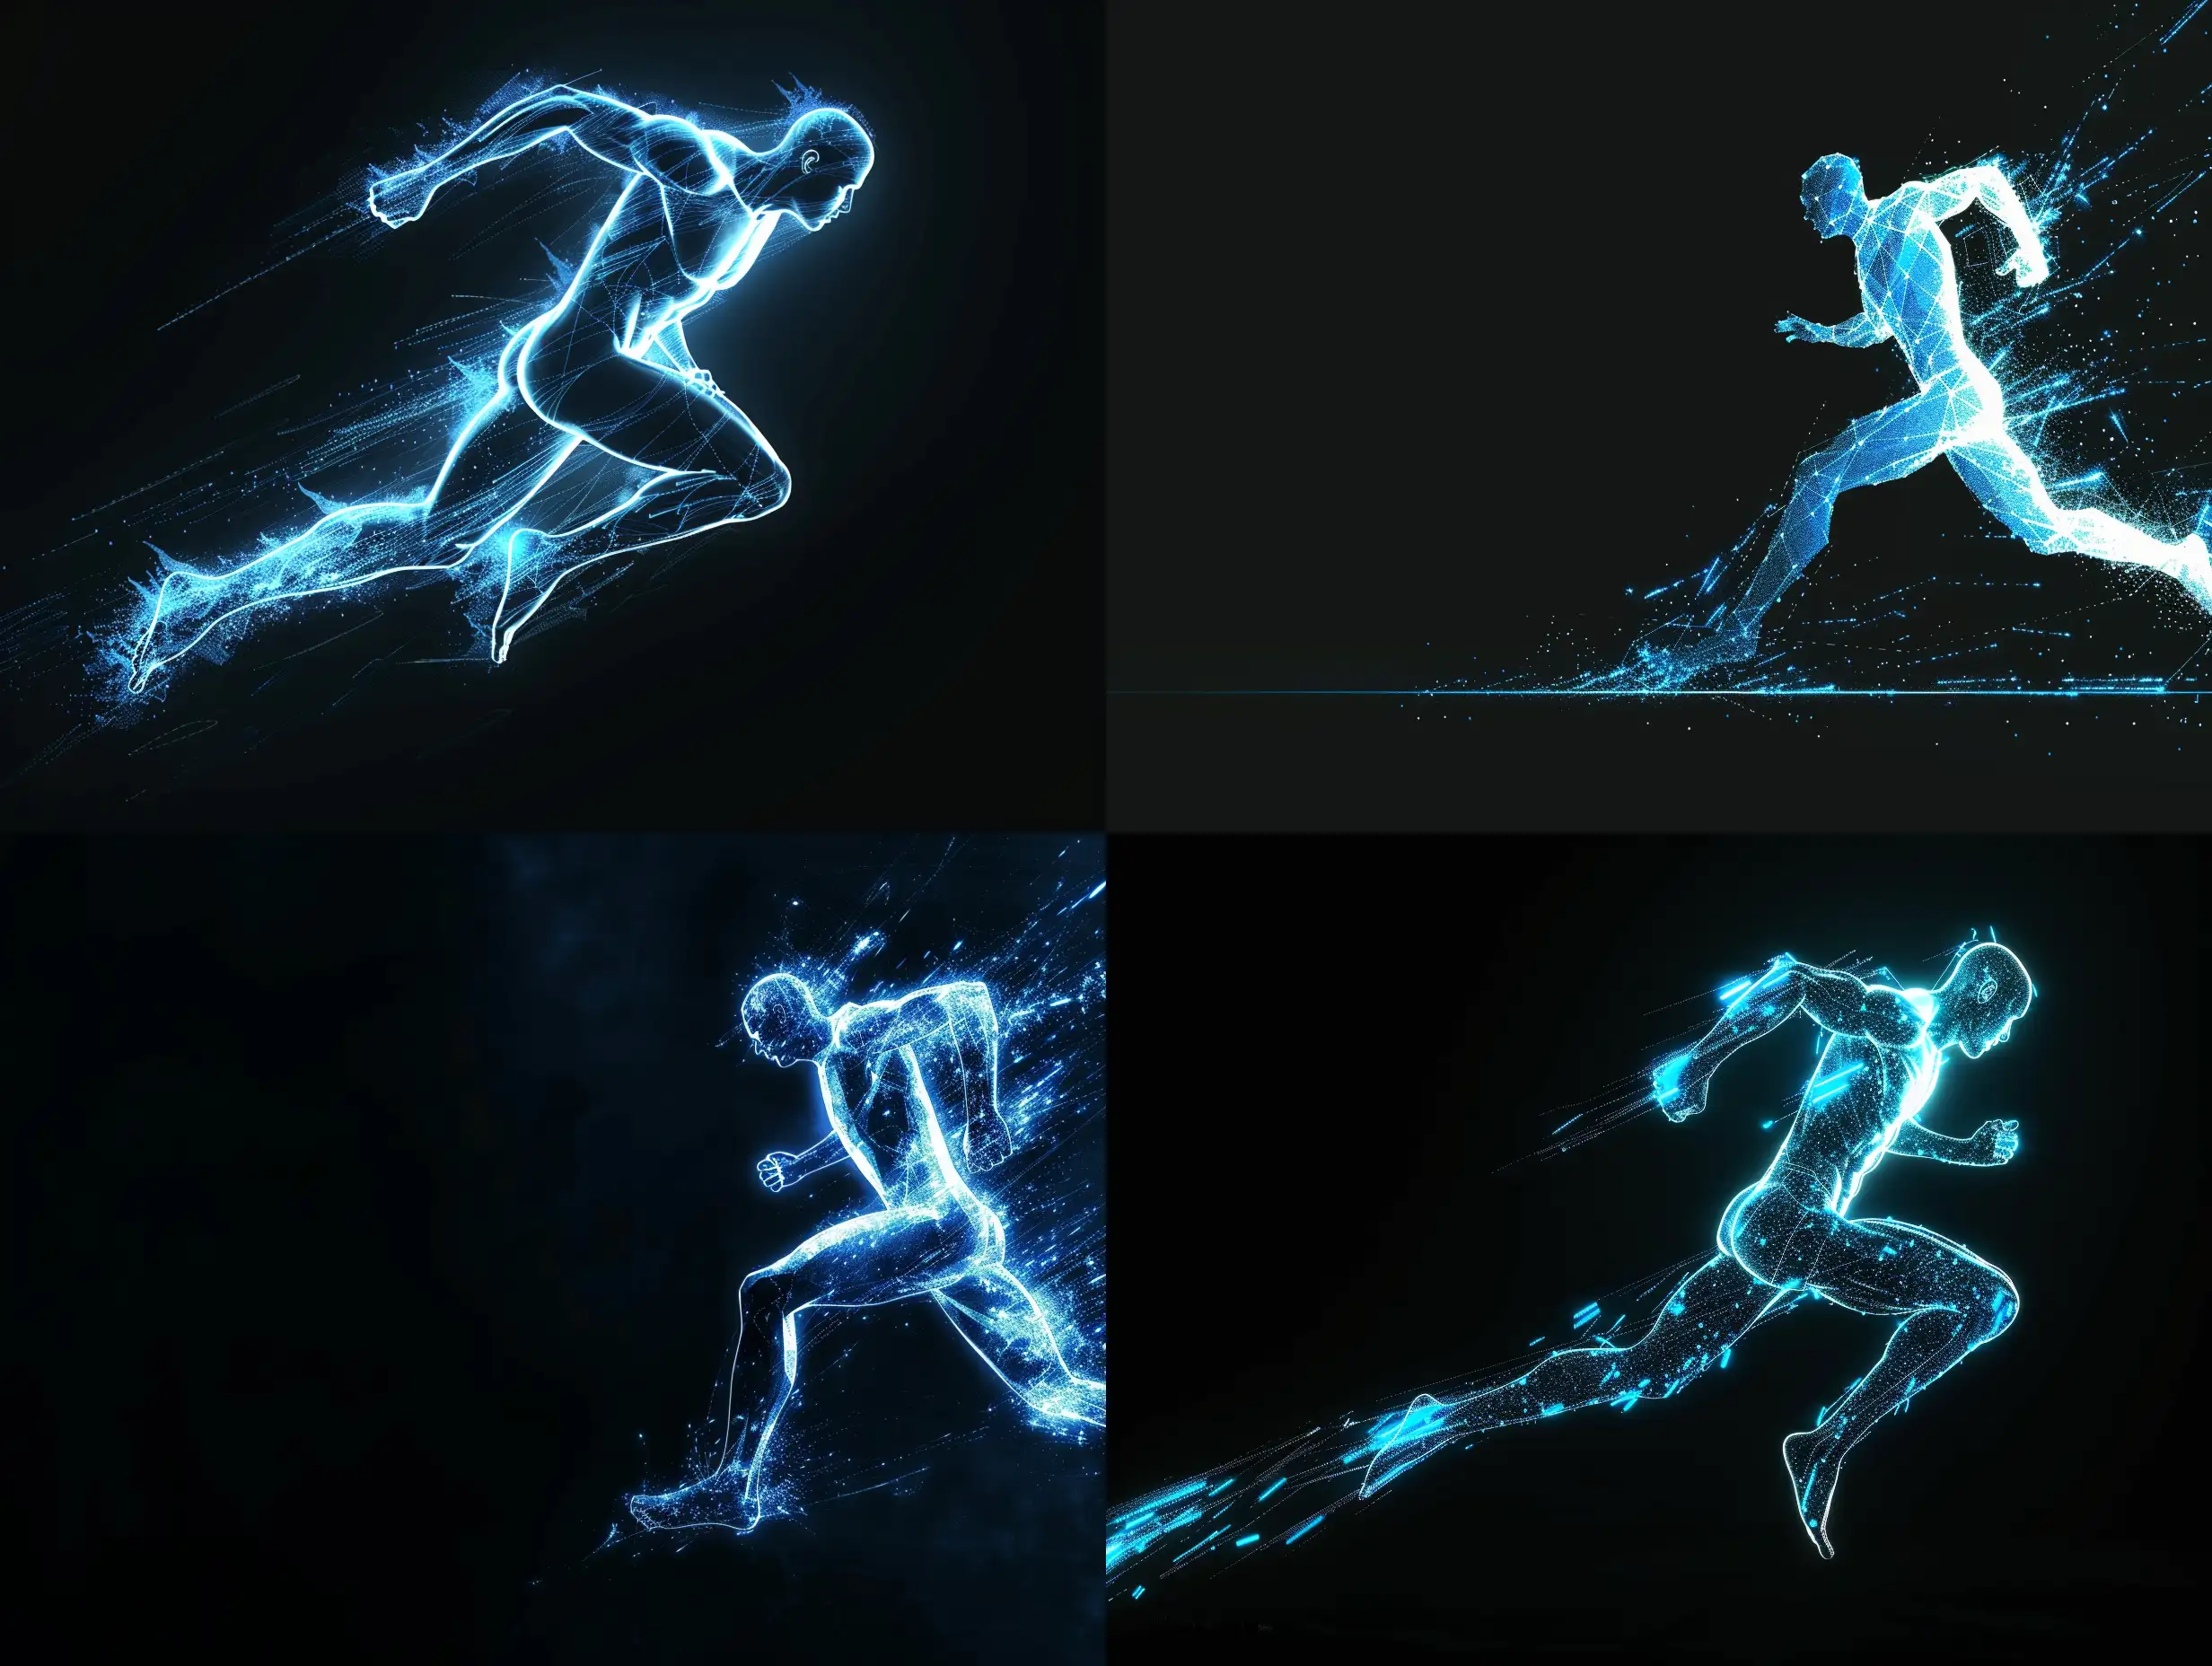 Produce an image of a digital human silhouette running, with the light point silhouette showing a dynamic leap in a strong blue sheen, against a deep black background, with blank space reserved on one side of the canvas for stock library users to add content as needed